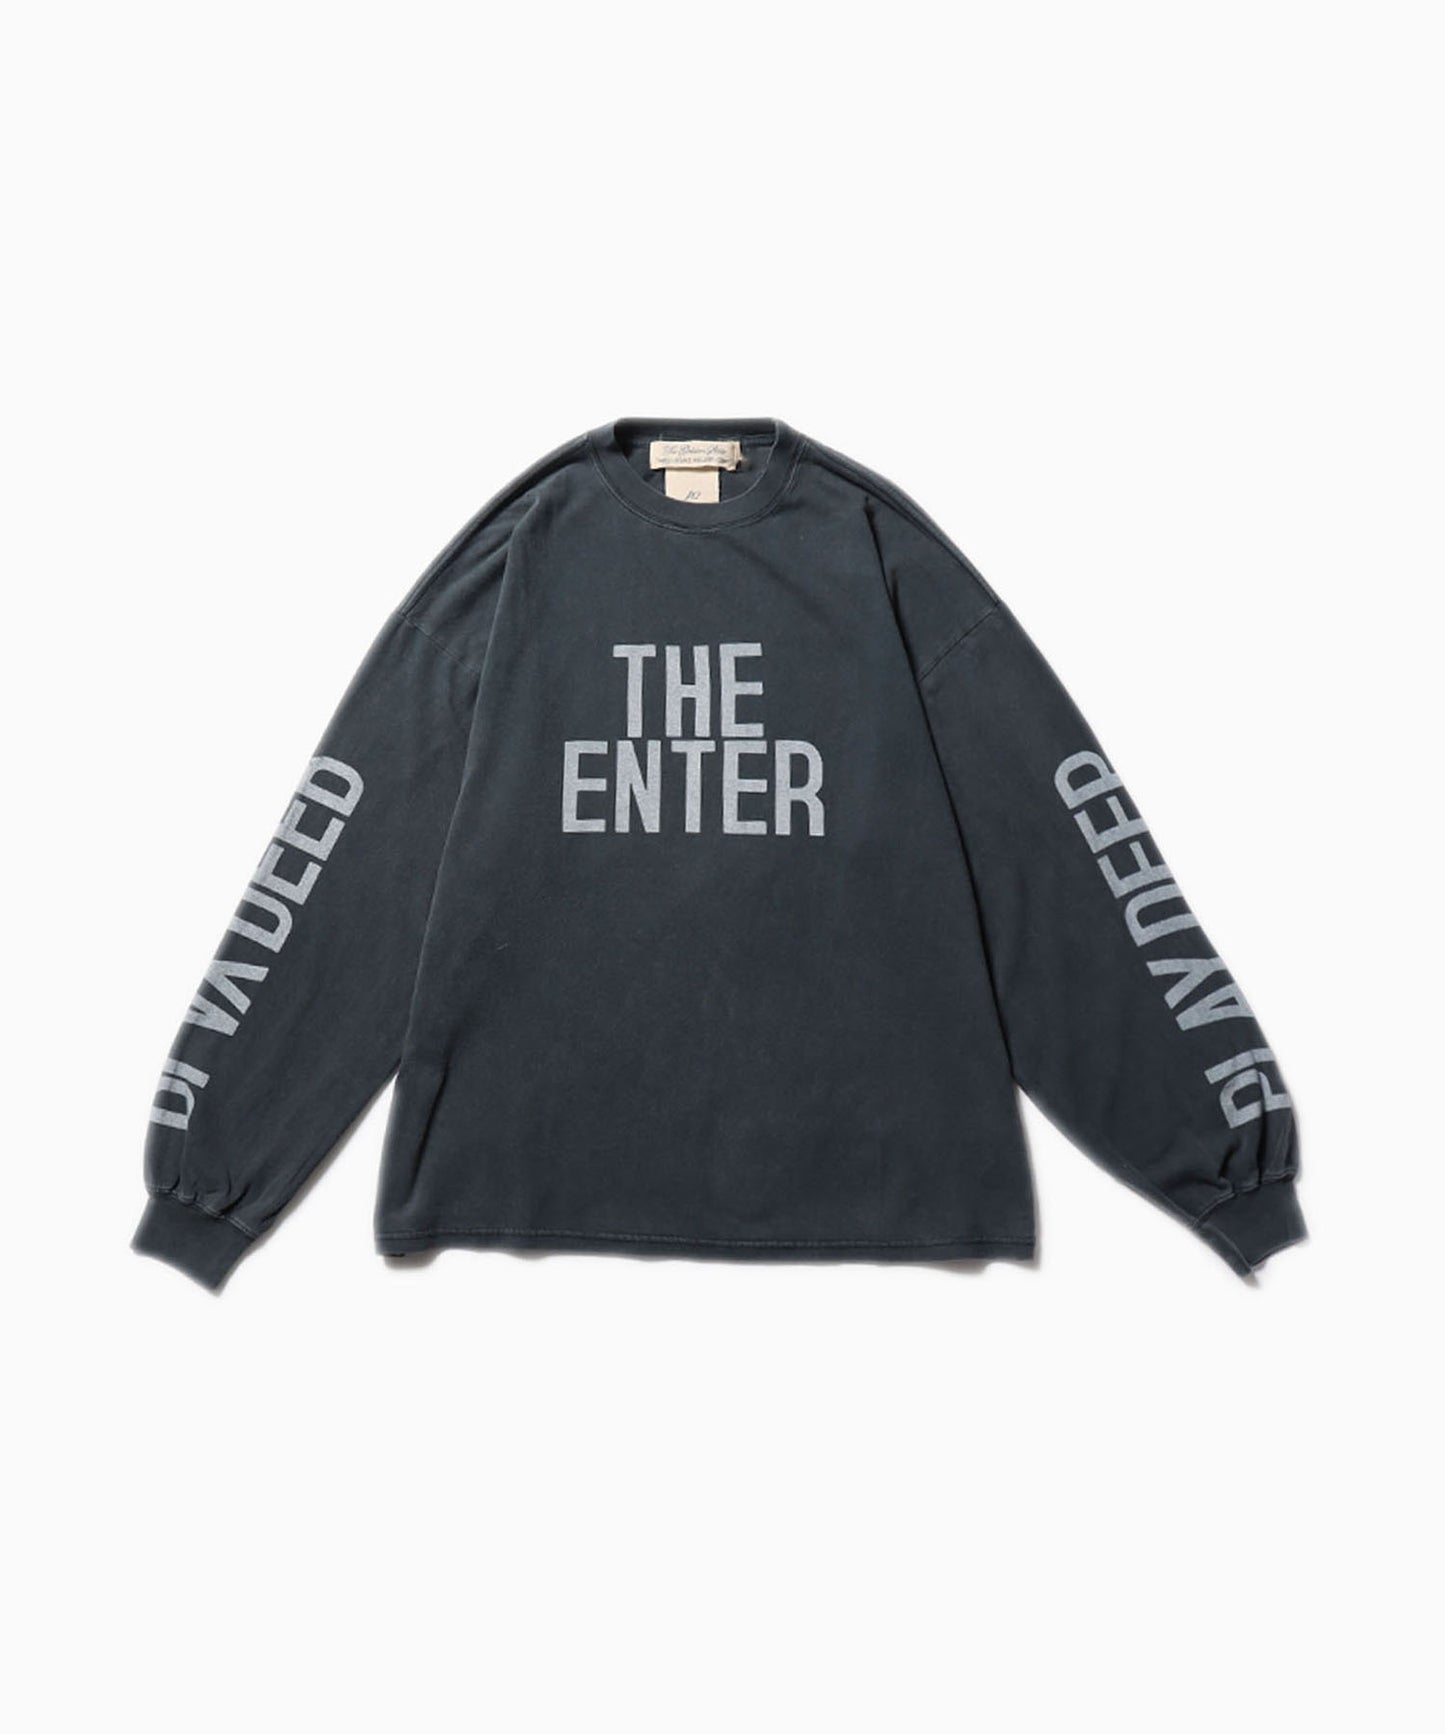 REMI RELIEF/レミレリーフ HARD SP加工20/-天竺ロンＴ(THE ENTER)